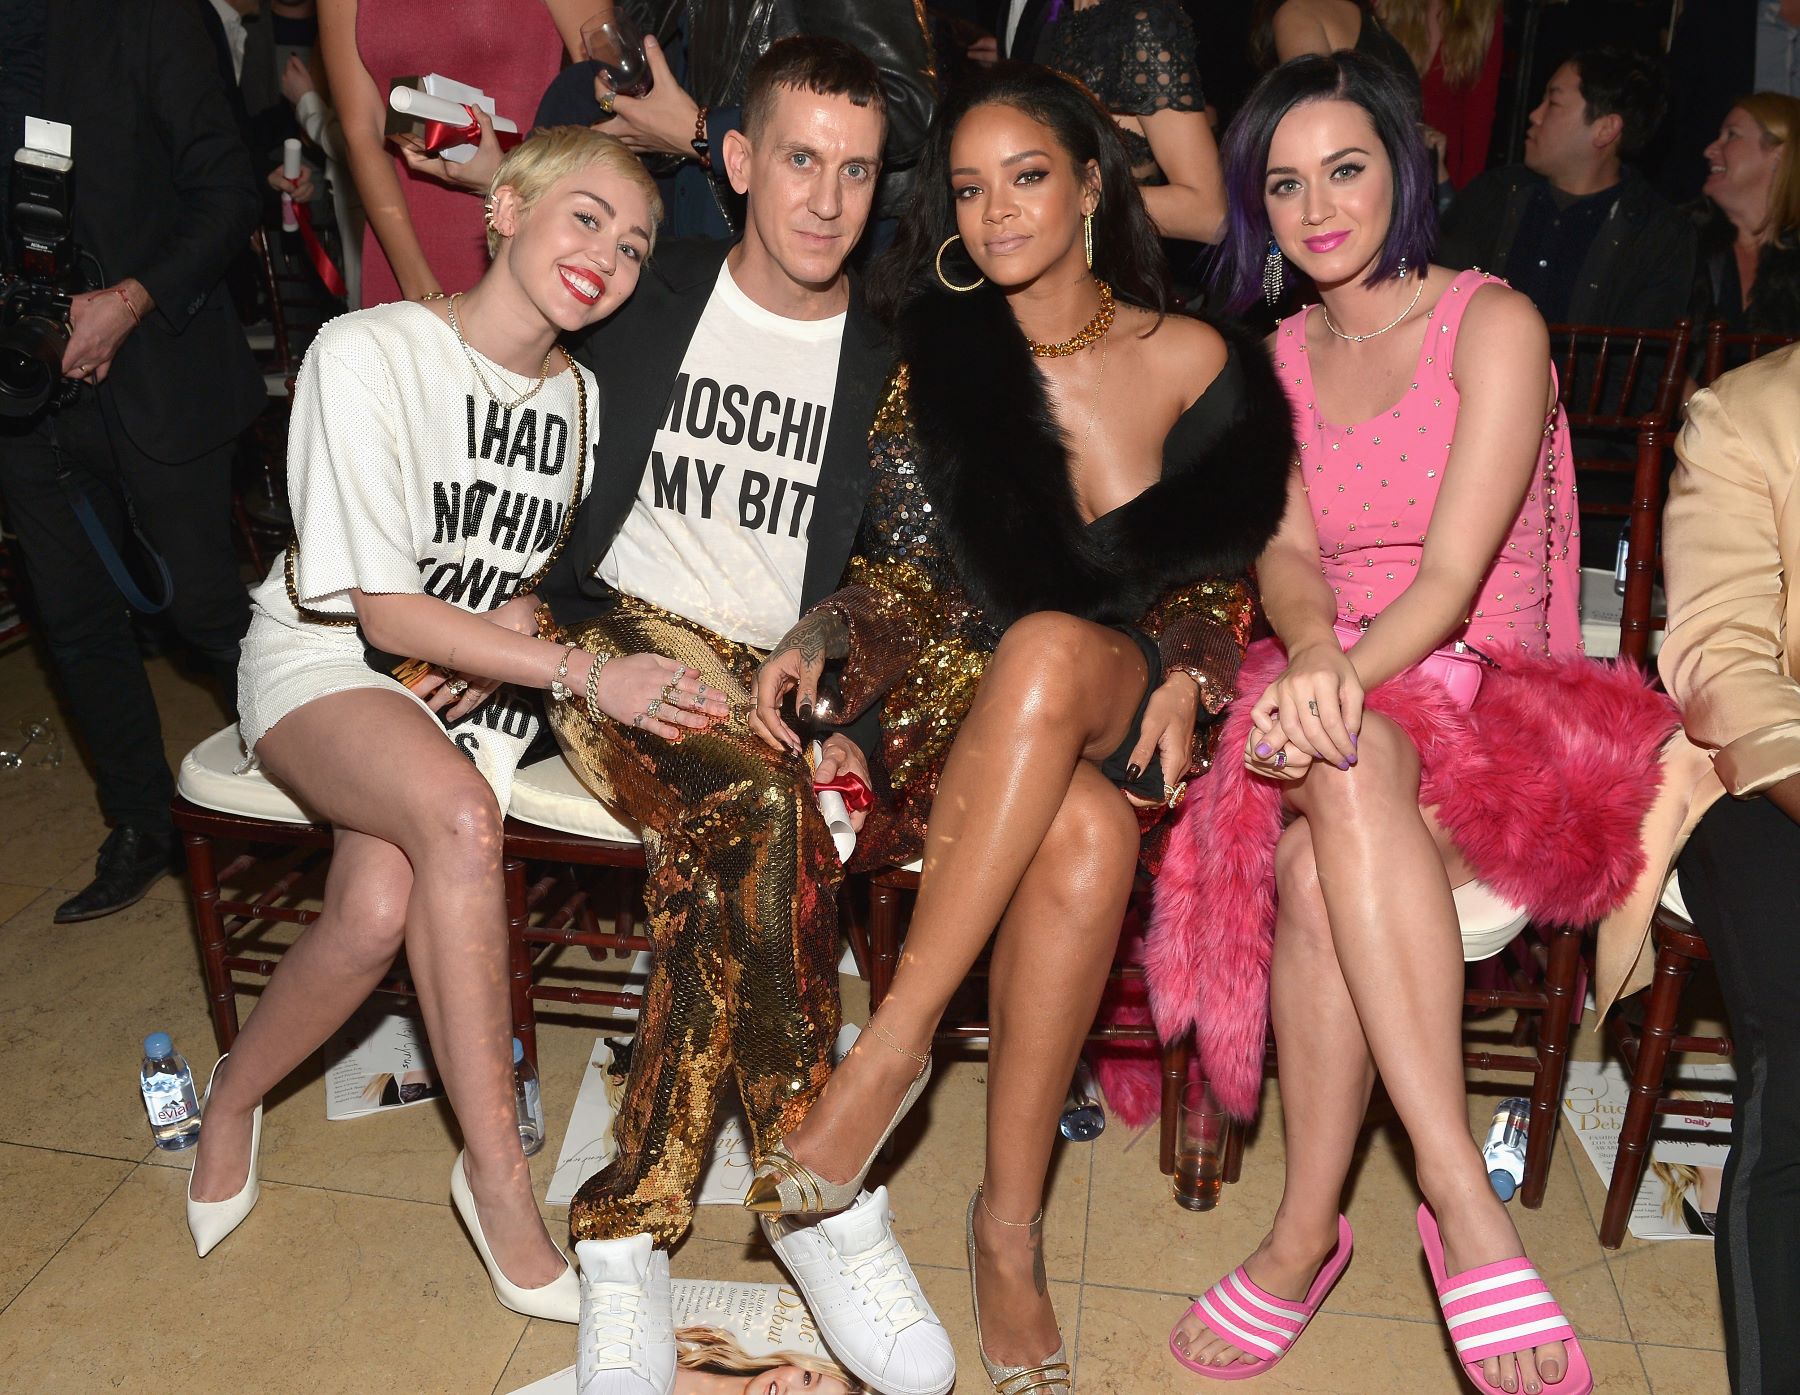 (L to R) Miley Cyrus, Jeremy Scott, Rihanna, and Katy Perry attending The Daily Front Row show at Sunset Tower